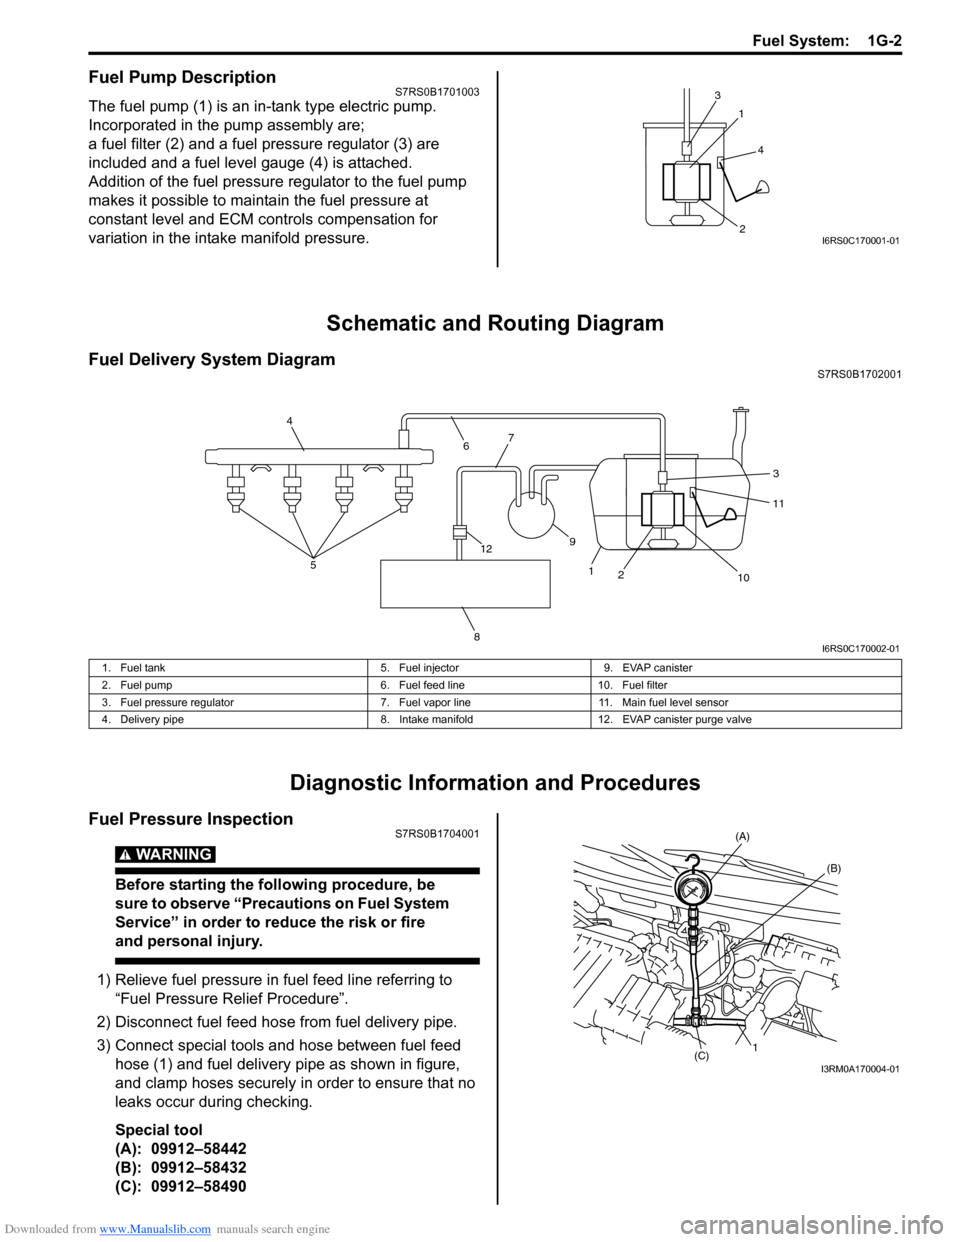 SUZUKI SWIFT 2008 2.G Service Workshop Manual Downloaded from www.Manualslib.com manuals search engine Fuel System:  1G-2
Fuel Pump DescriptionS7RS0B1701003
The fuel pump (1) is an in-tank type electric pump. 
Incorporated in the pump assembly ar